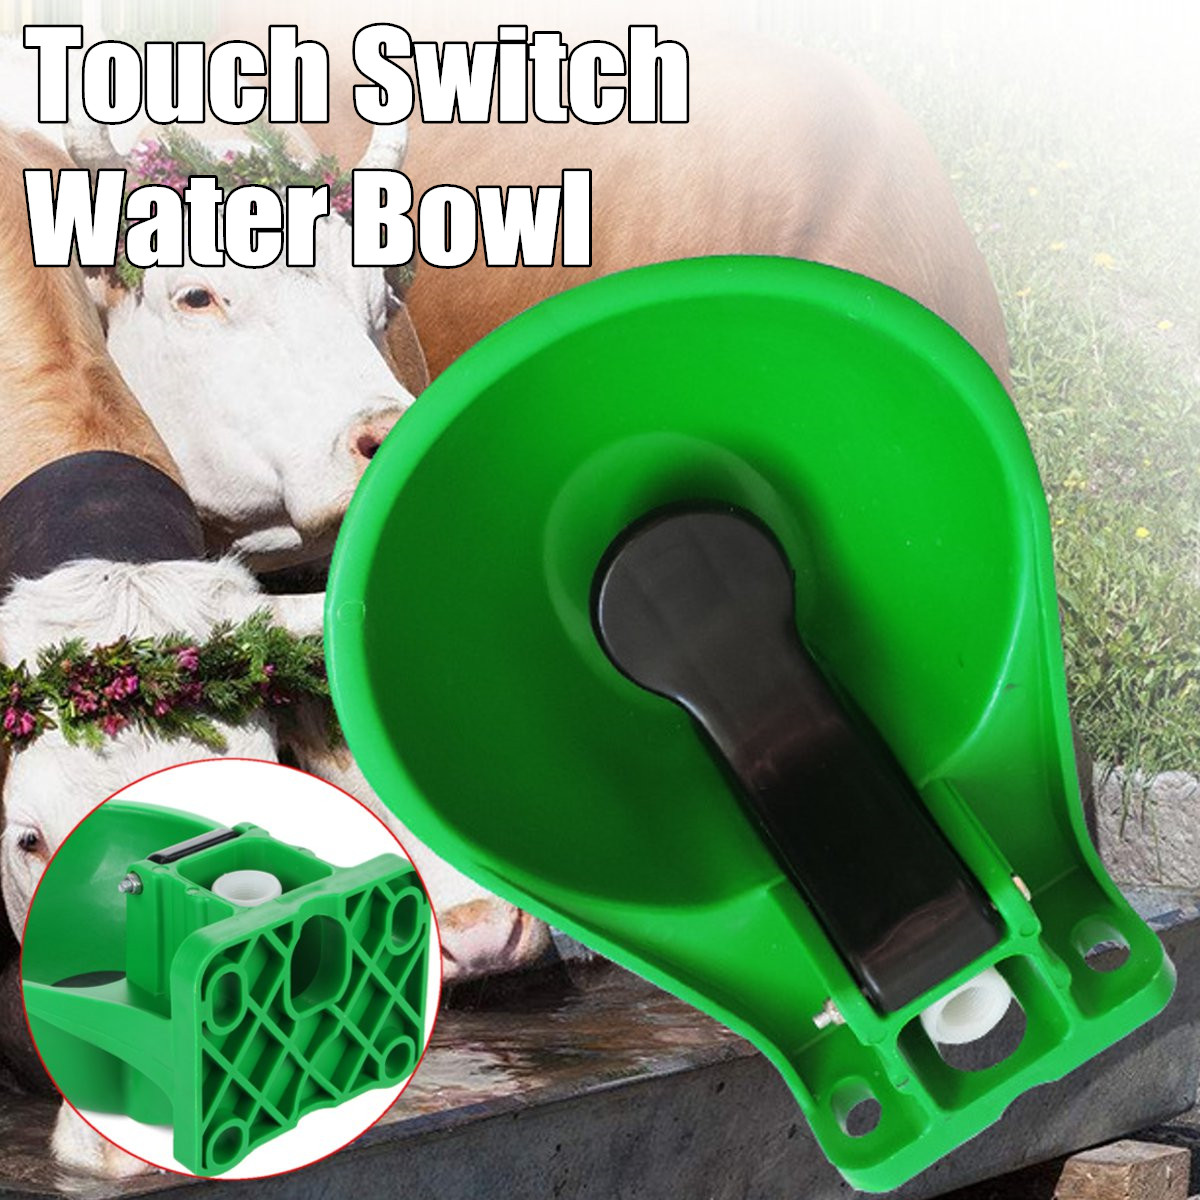 Large-Automatic-Touch-Switch-Water-Bowl-Bottle-Dispenser-Farm-Cow-Horse-Drinking-Waterer-1385253